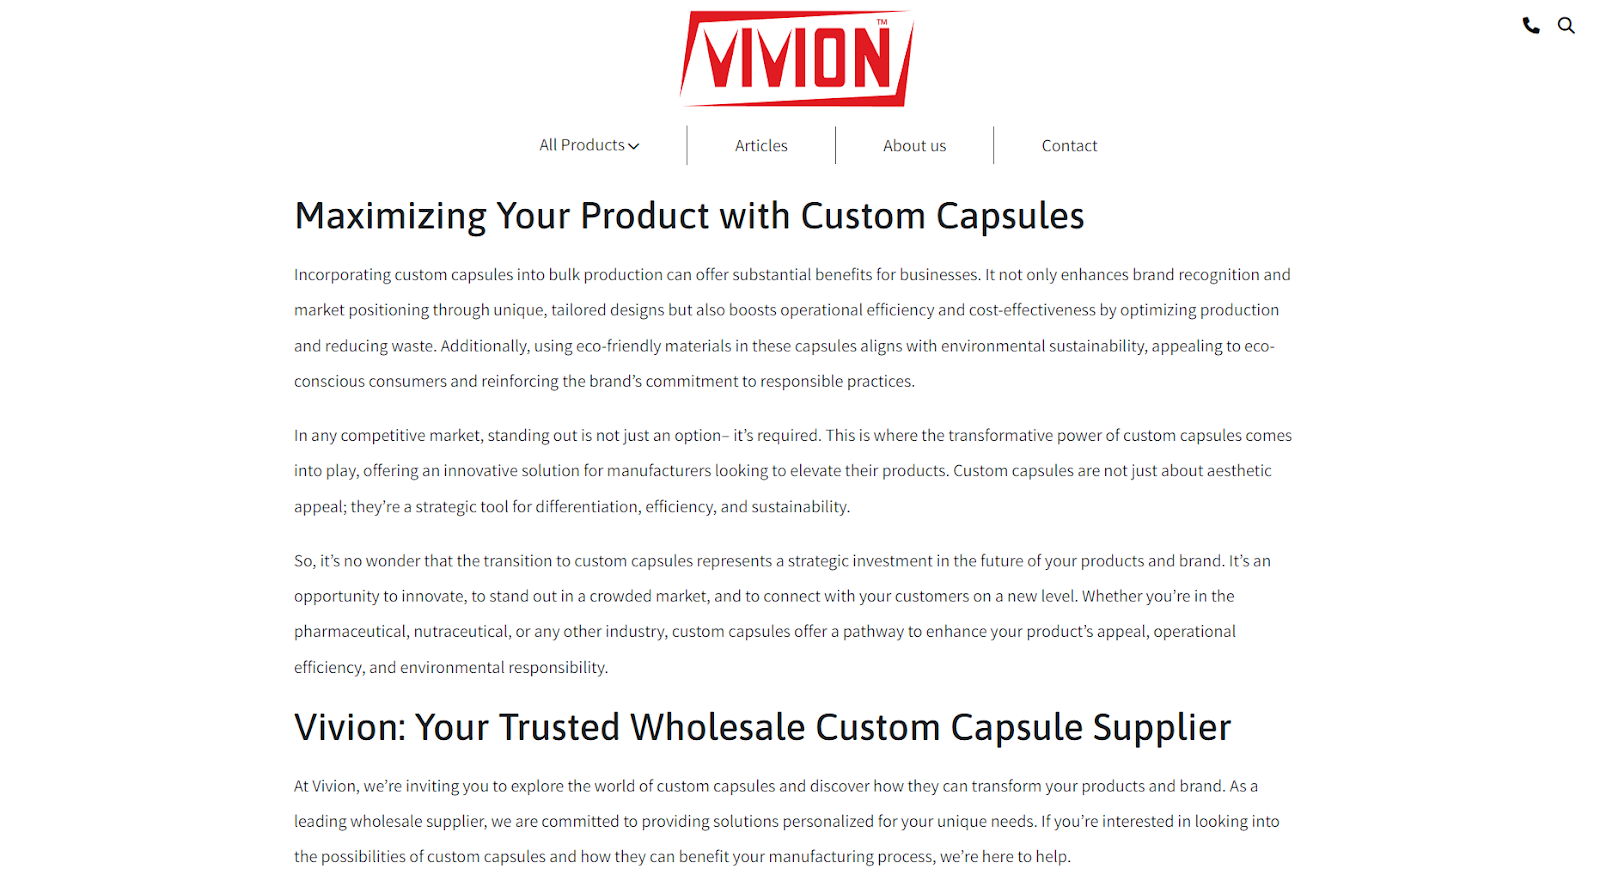 Screenshot of a guide on the business benefits of using custom capsules.